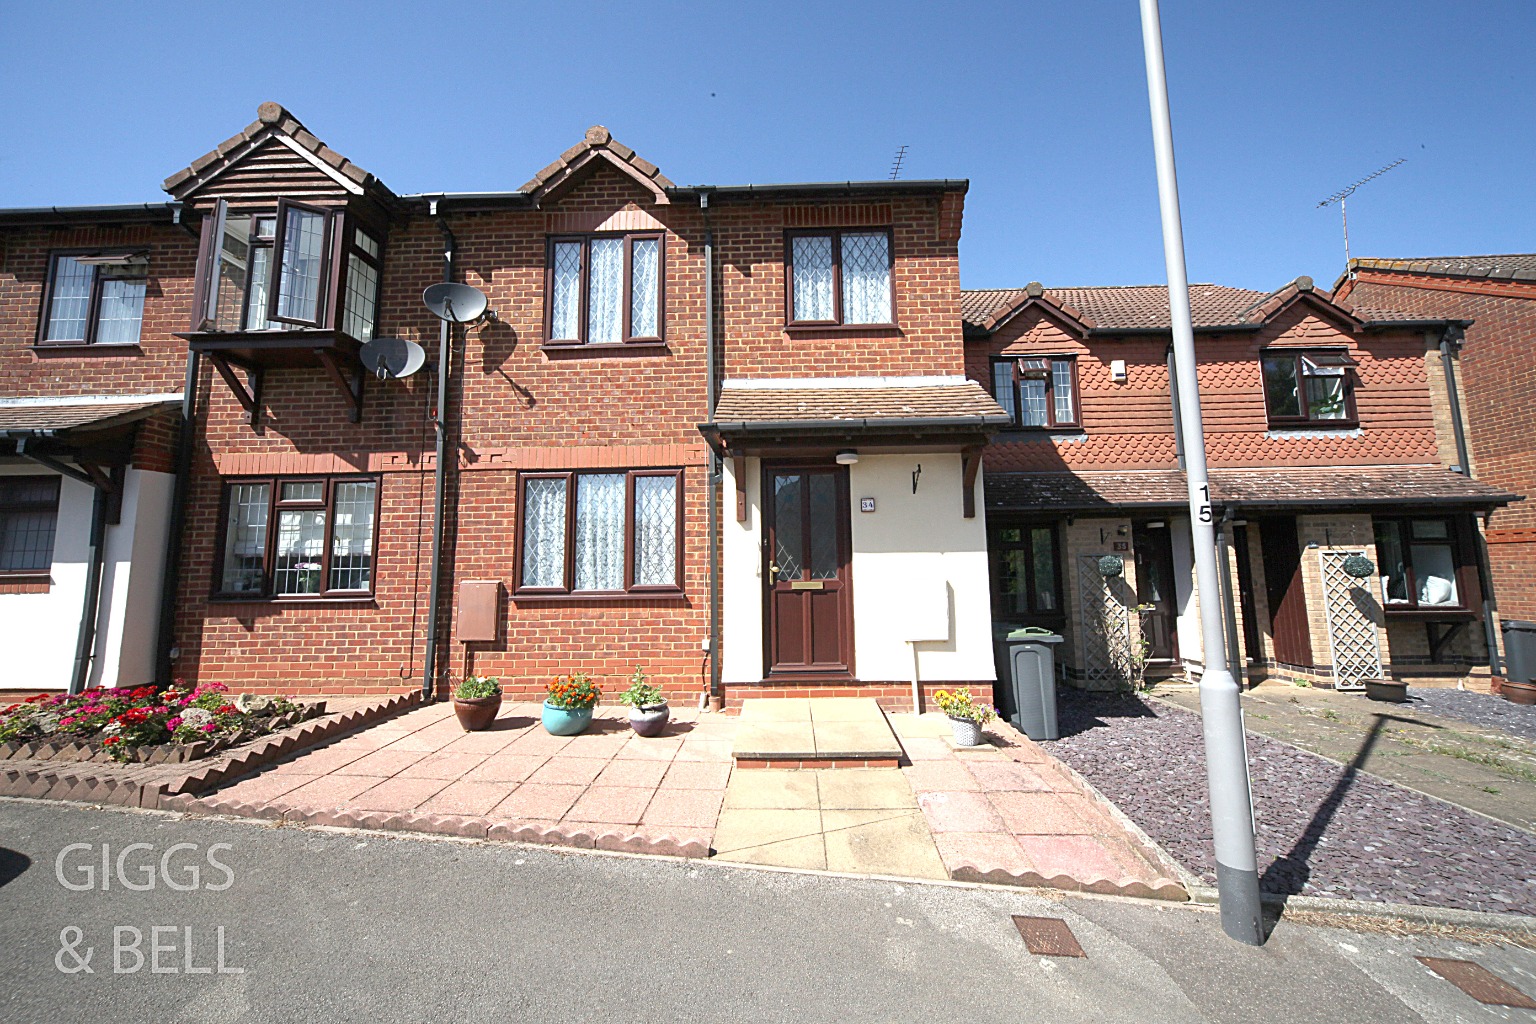 3 bed terraced house for sale in Malthouse Green, Luton, LU2 